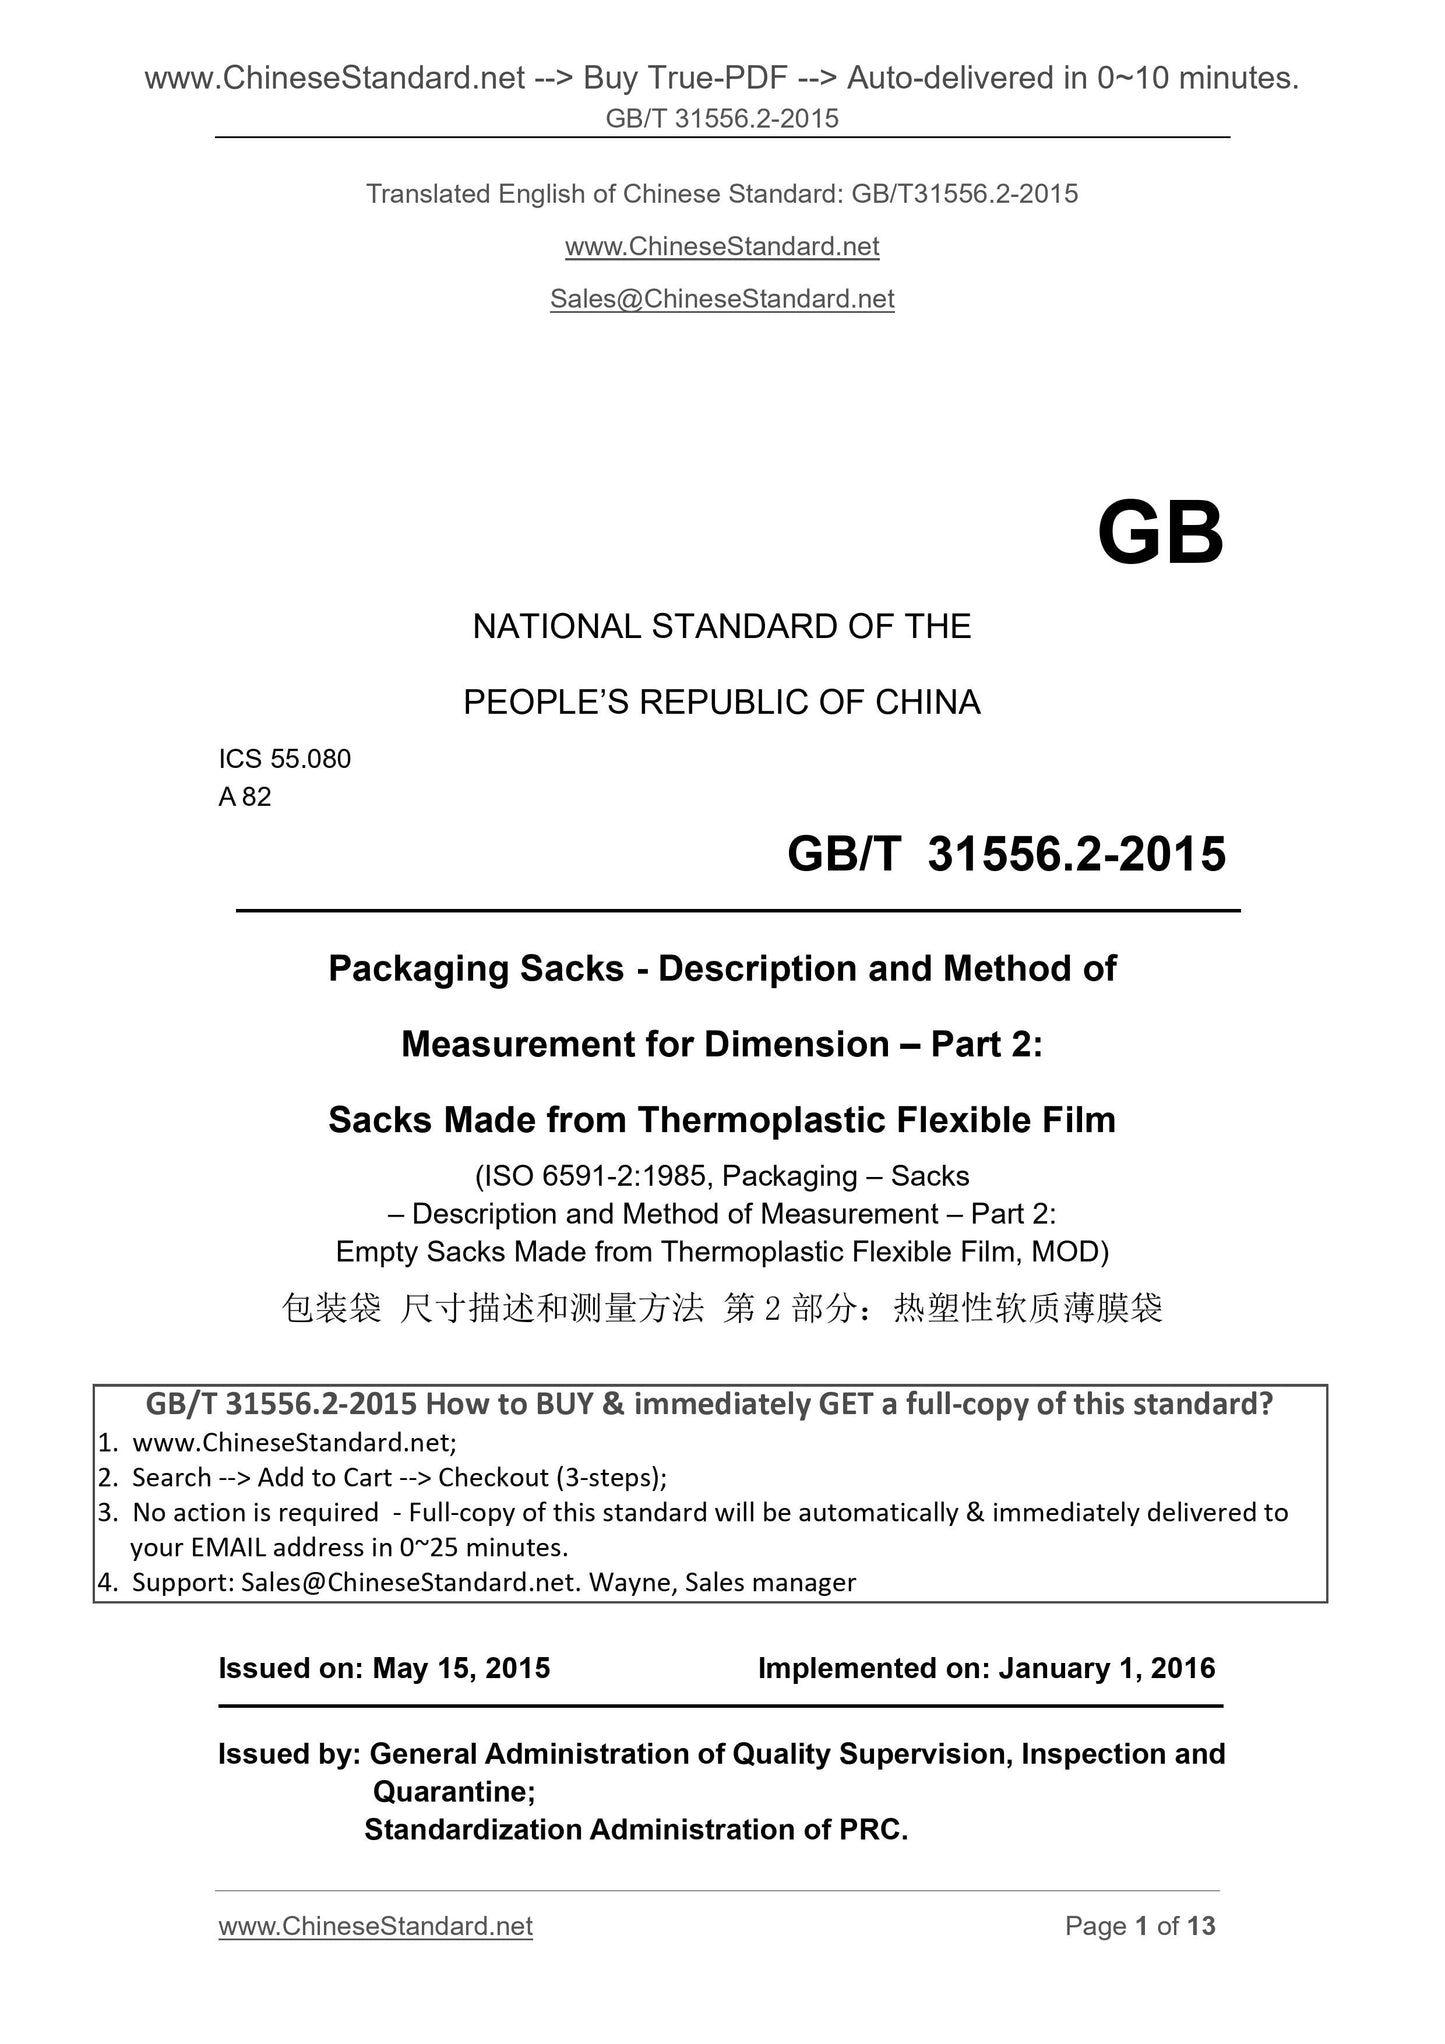 GB/T 31556.2-2015 Page 1